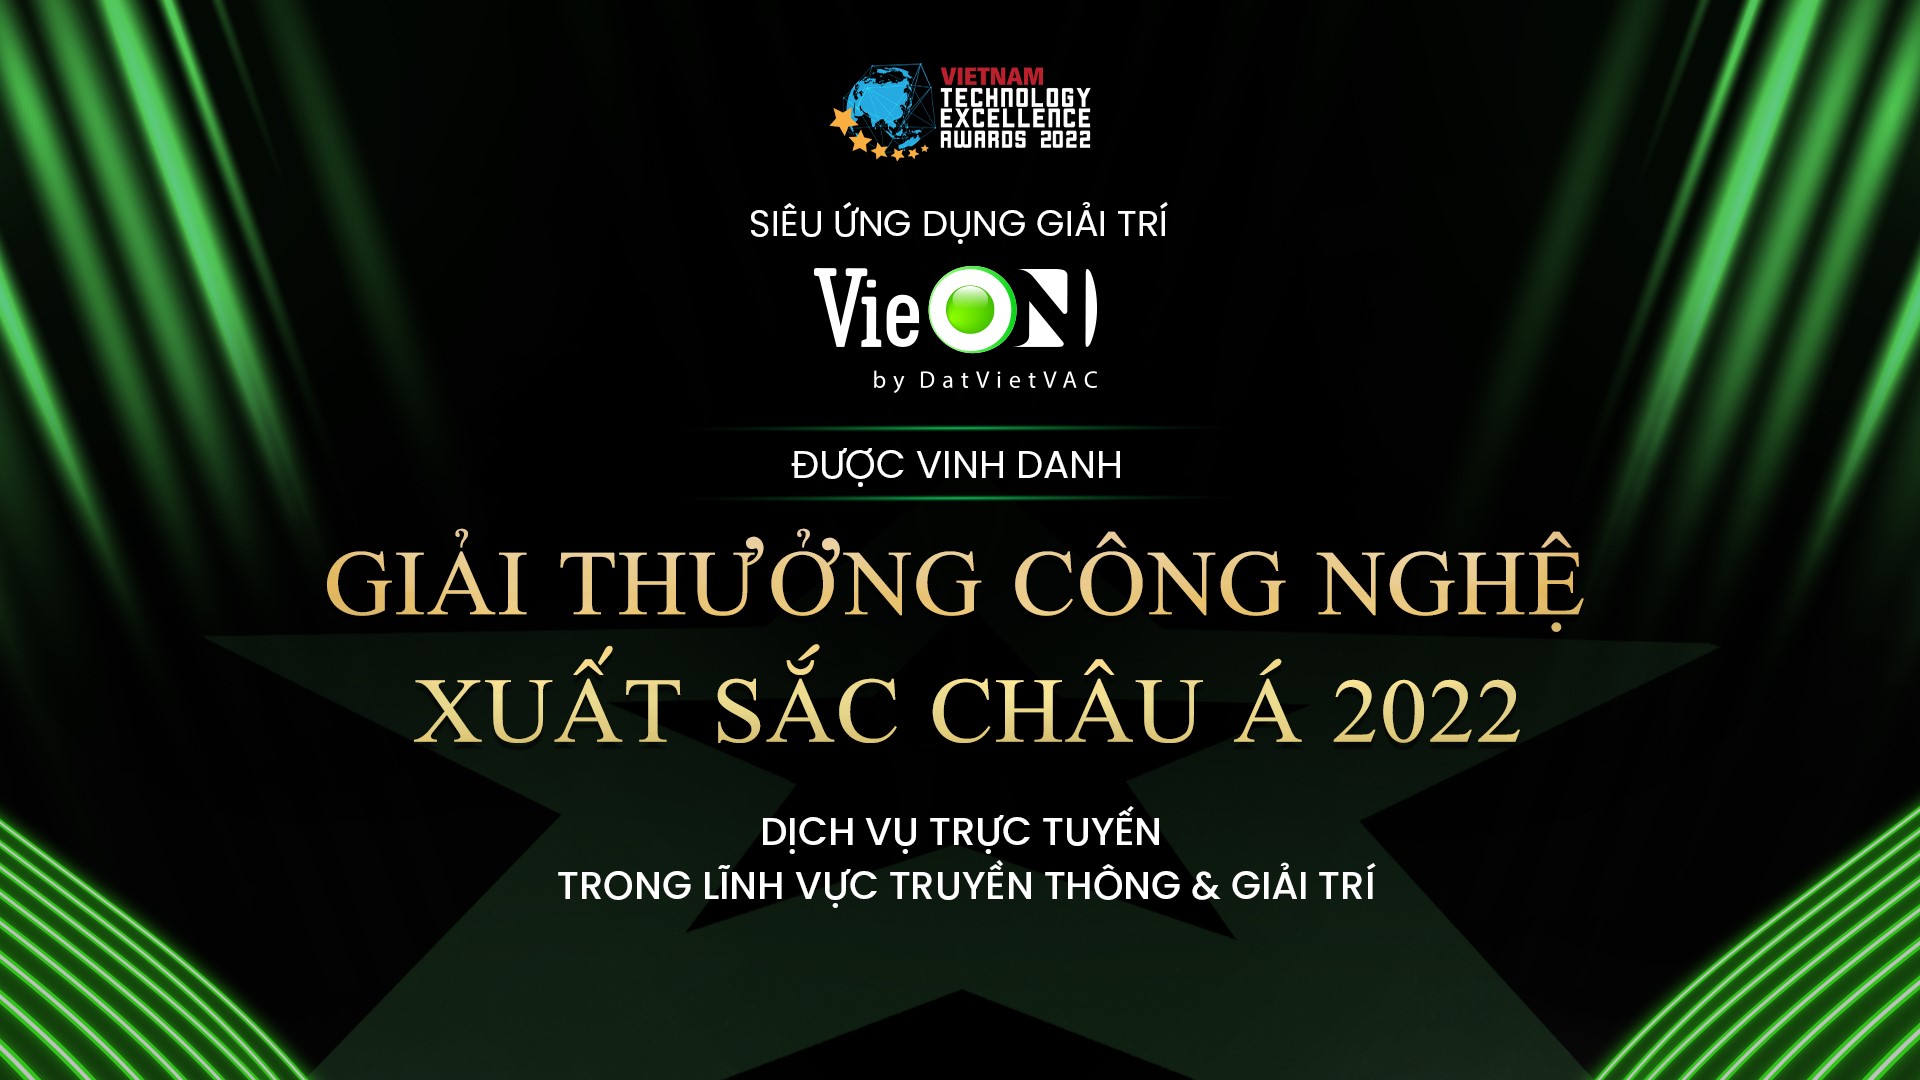 Vietnam’s OTT app VieON honored at Asian Technology Excellence Awards for second consecutive year